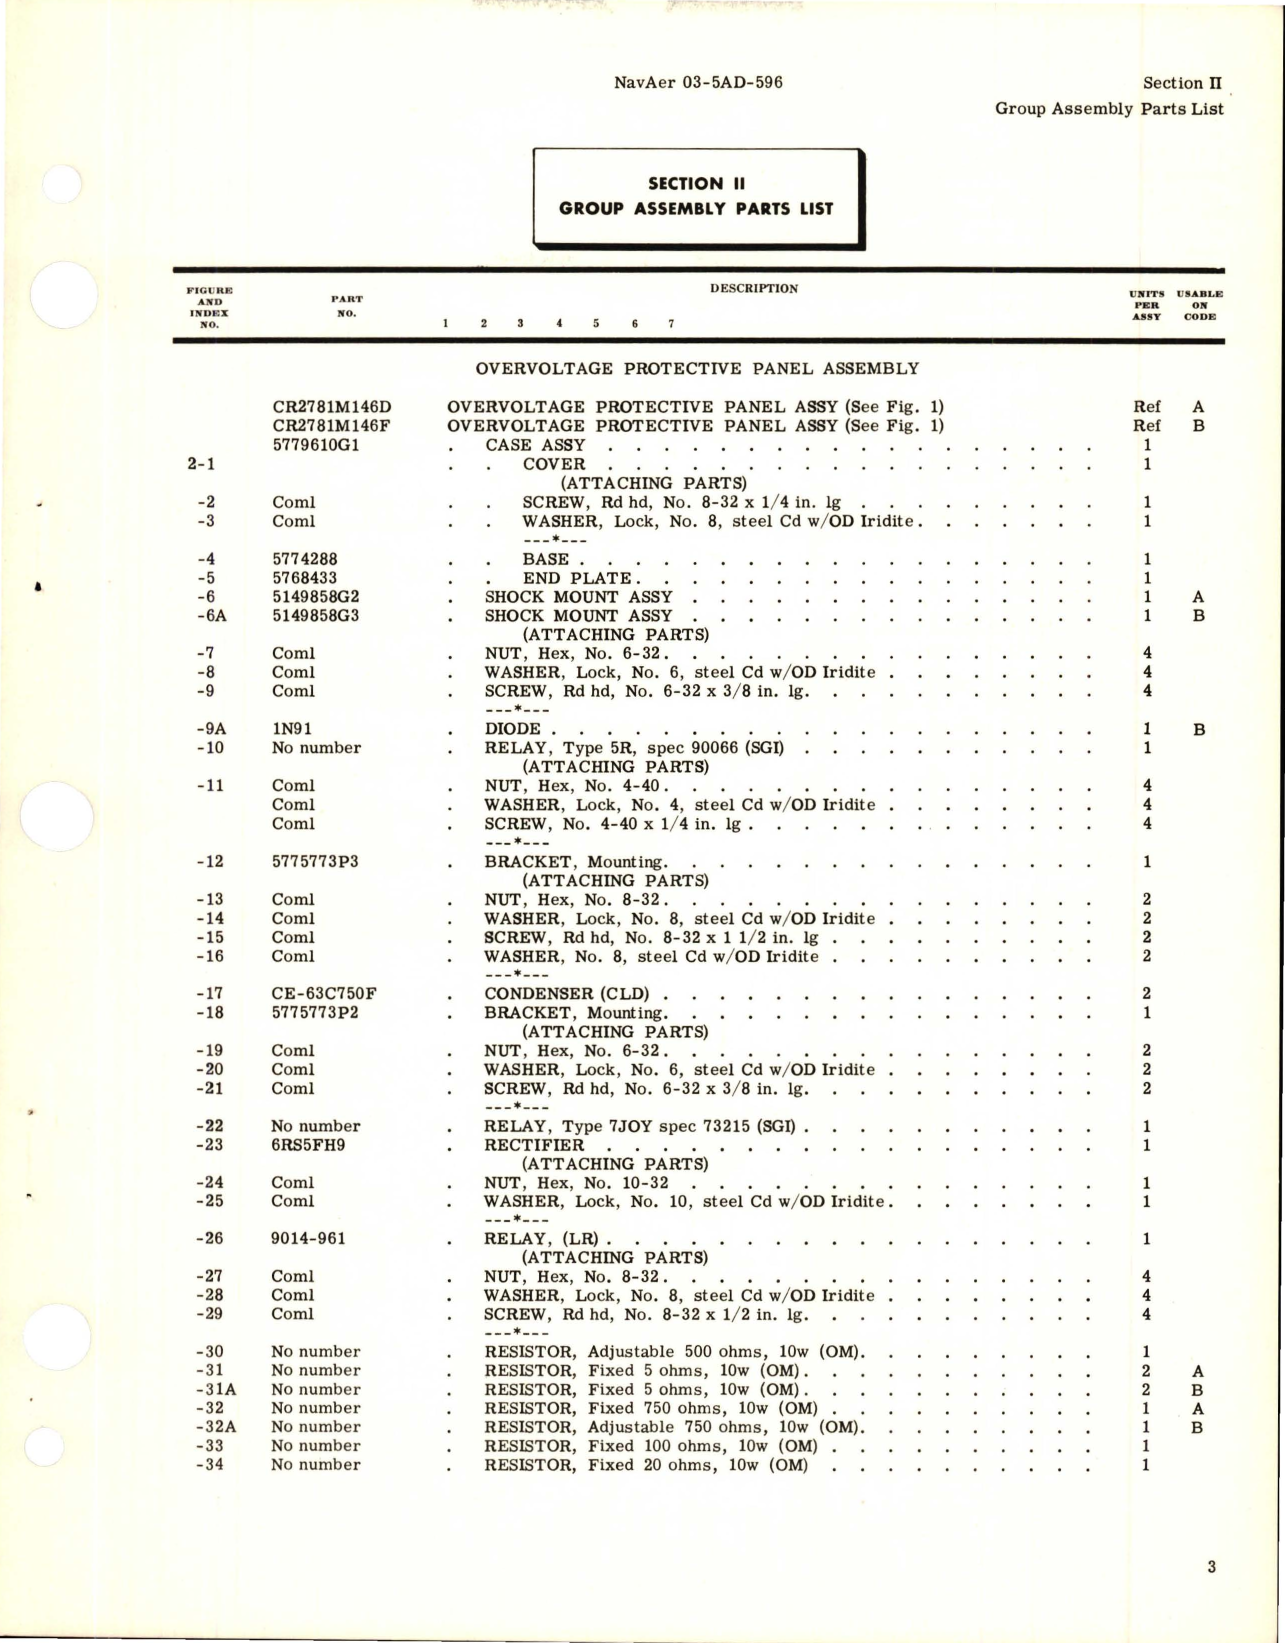 Sample page 5 from AirCorps Library document: Illustrated Parts Breakdown for Overvoltage Protective Panel for DC Generator - Models CR2781M146D and CR2781M146F 